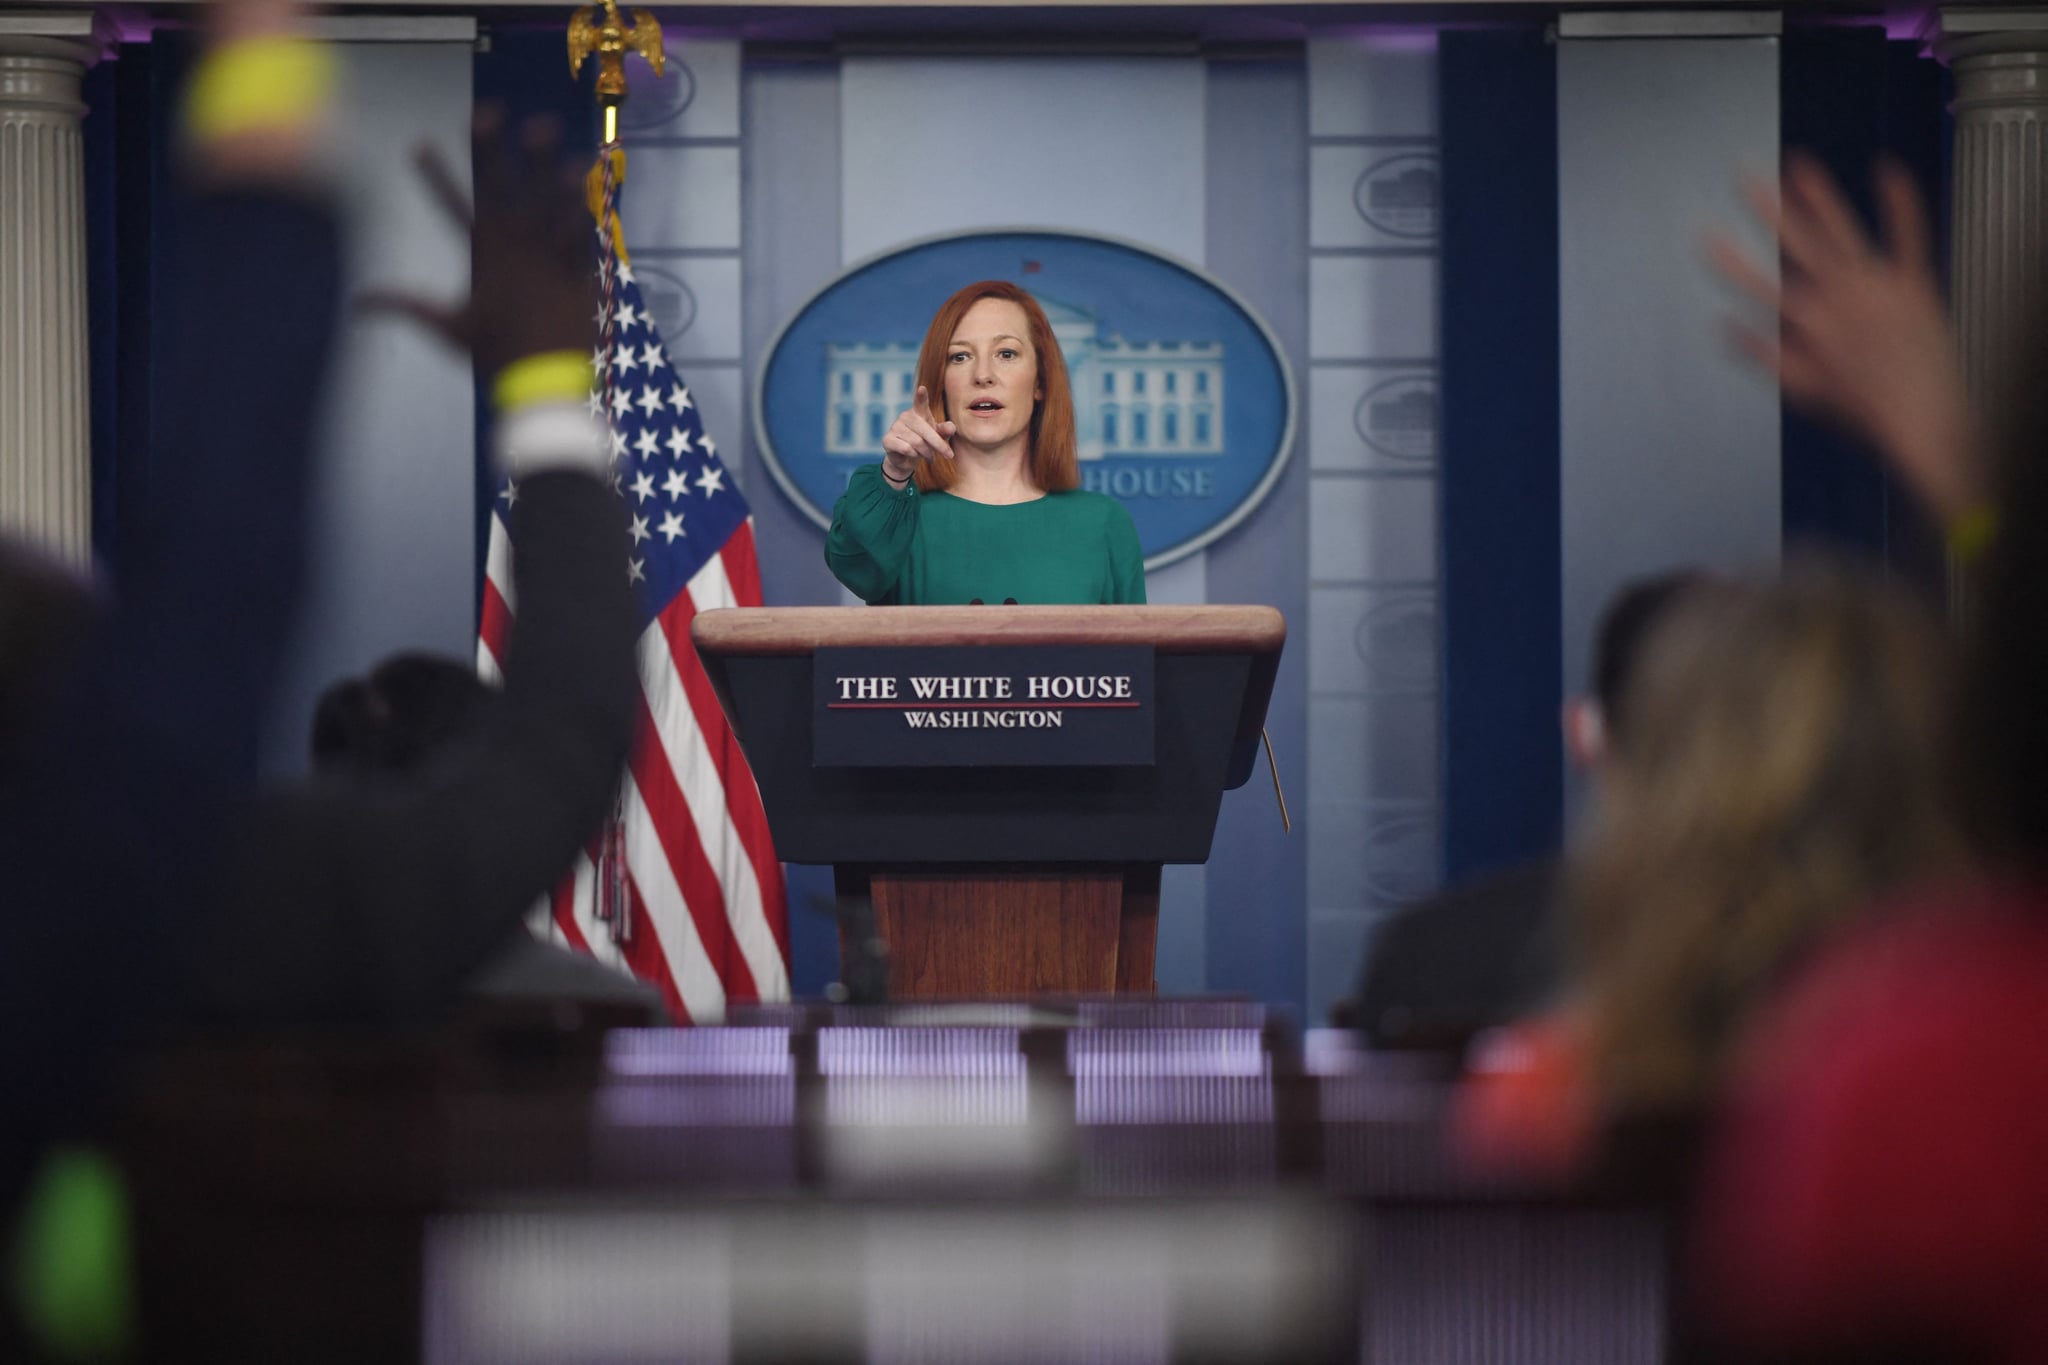 White House Press Secretary Jen Psaki answers questions as she speaks during the daily press briefing on March 15, 2021, in the Brady Briefing Room of the White House in Washington, DC. (Photo by Eric BARADAT / AFP) (Photo by ERIC BARADAT/AFP via Getty Images)